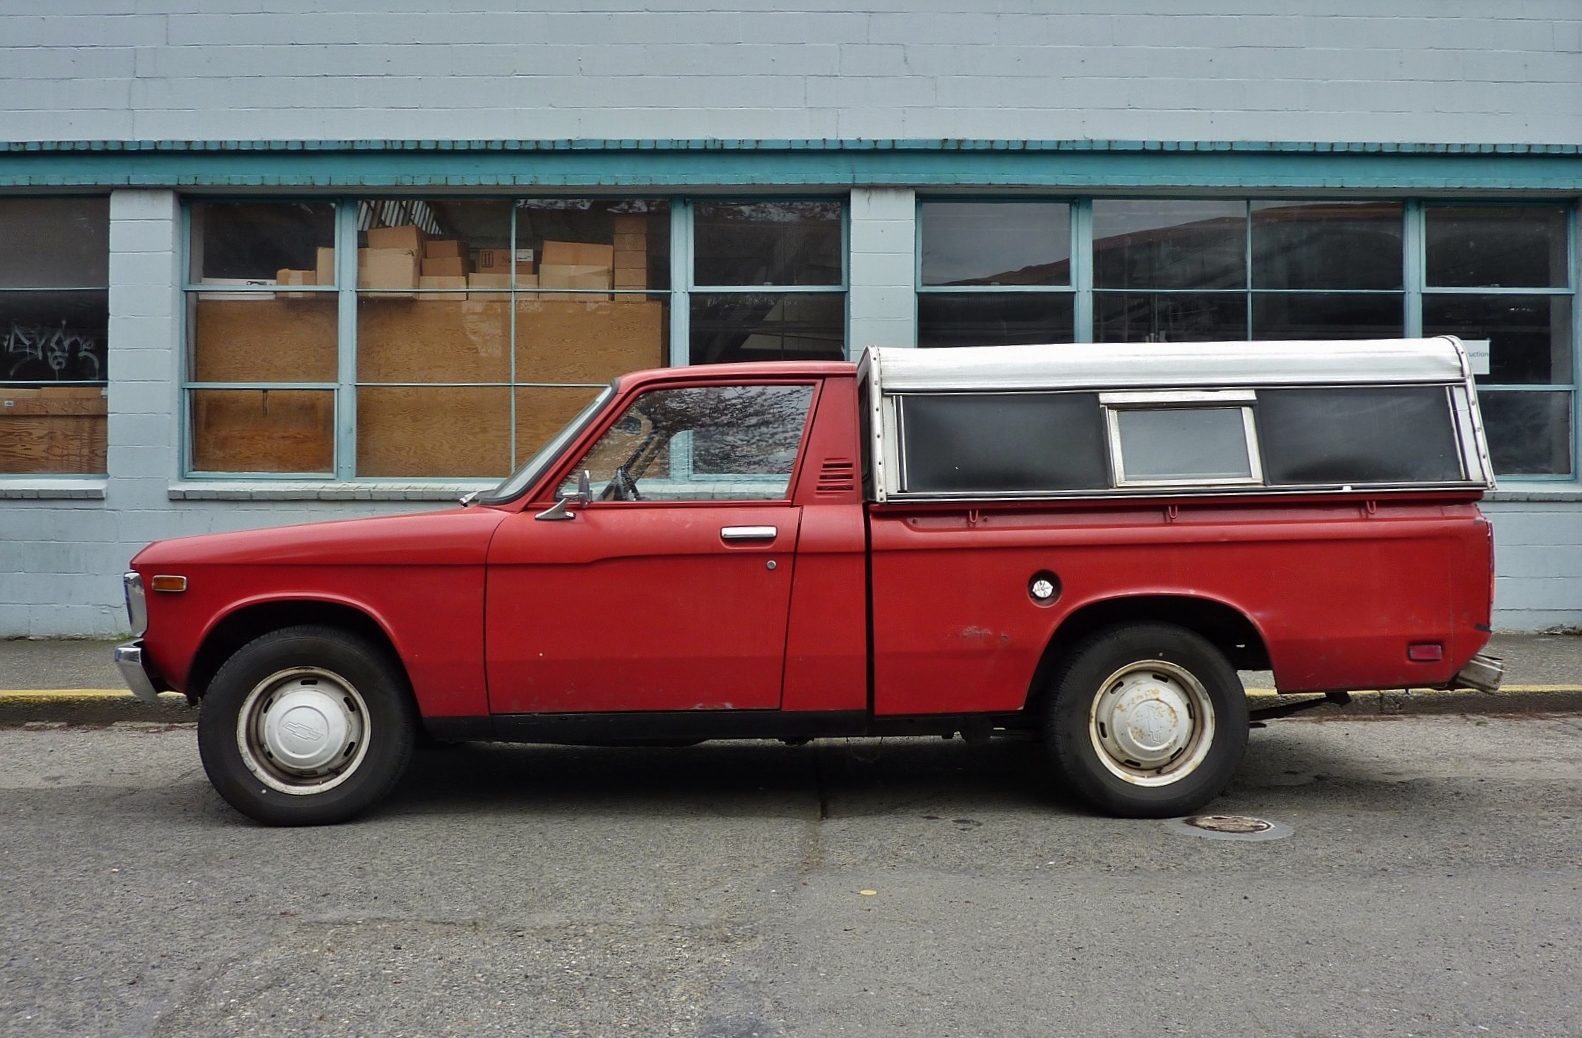 Seattle's Parked Cars: 1978 Chevrolet LUV